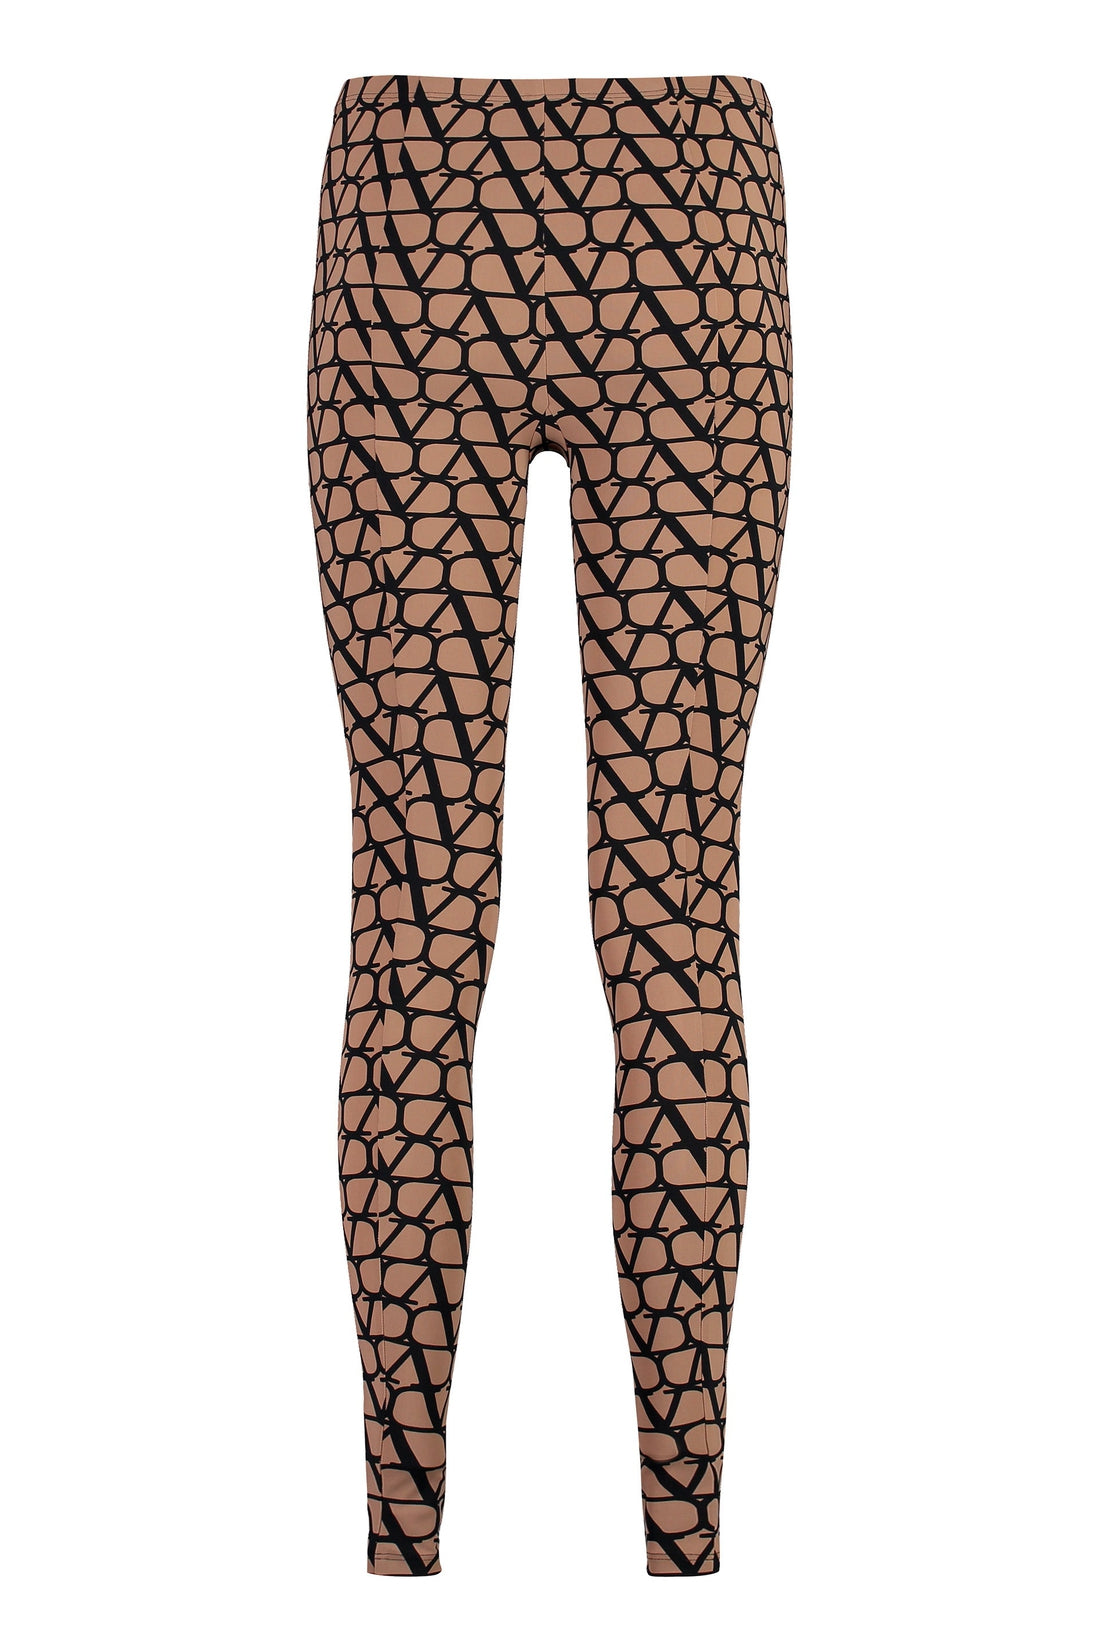 Valentino-OUTLET-SALE-Printed leggings-ARCHIVIST